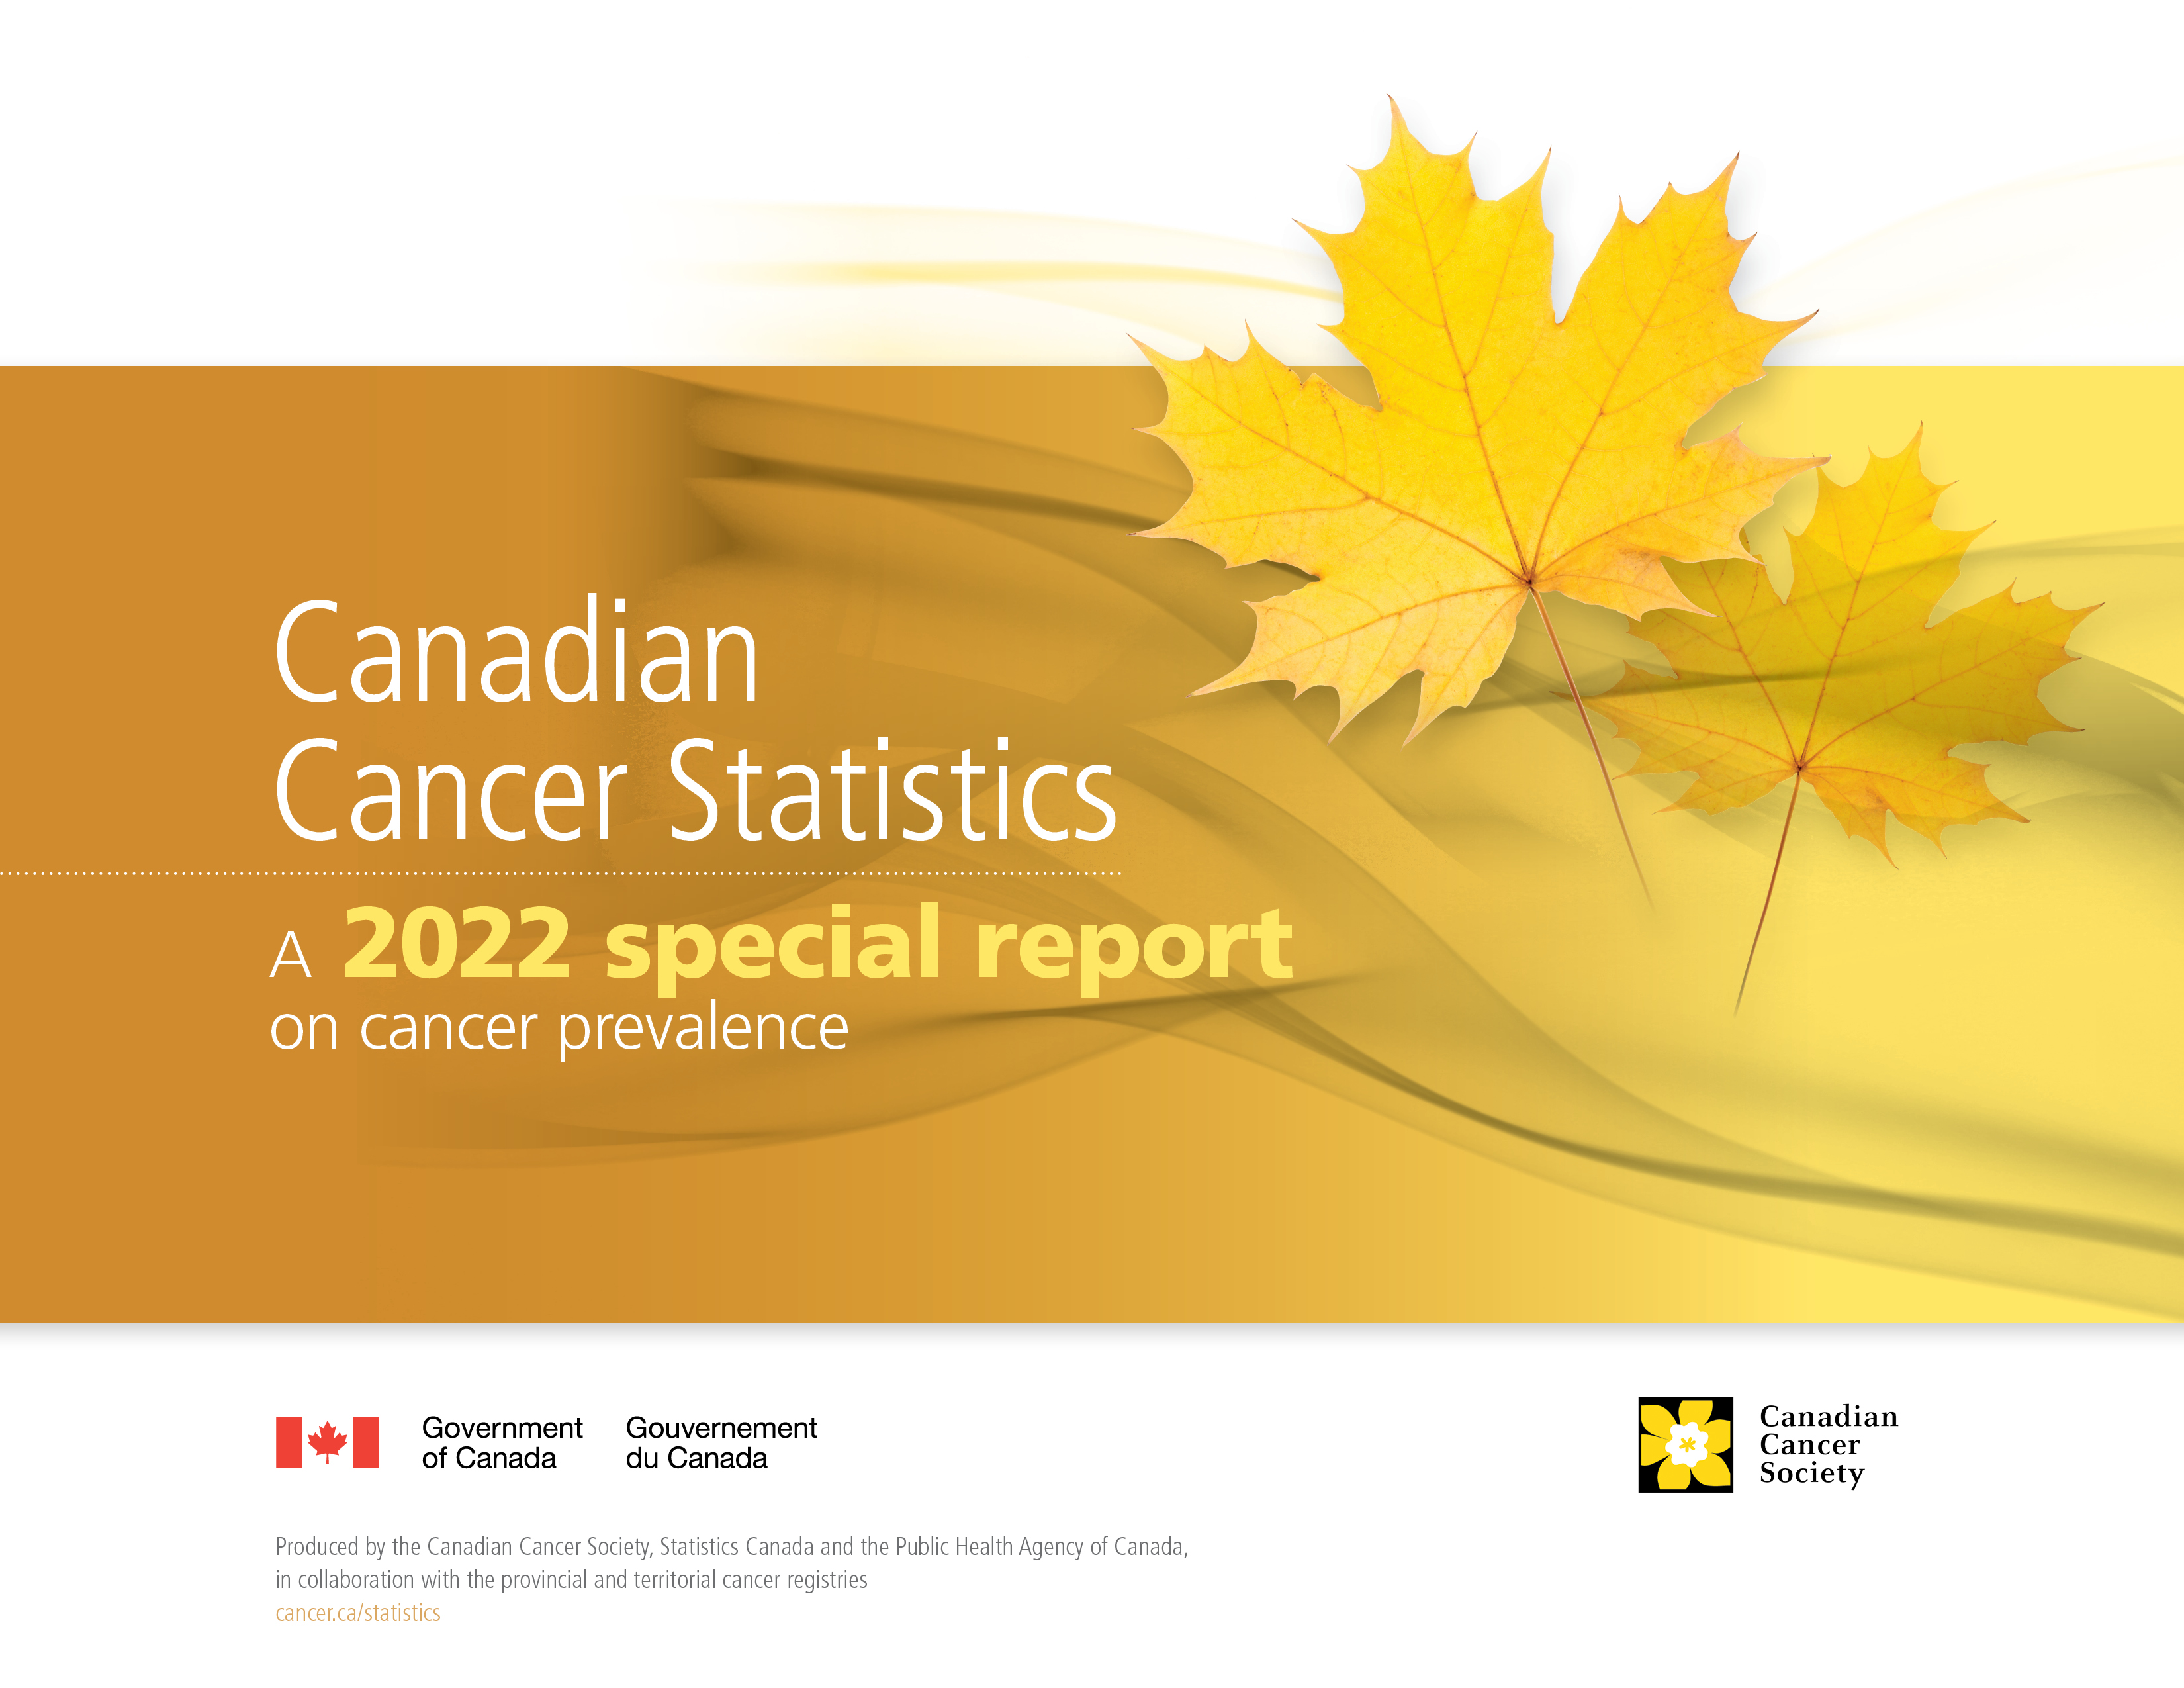 Canadian Cancer Statistics: A 2022 special report on cancer prevalence